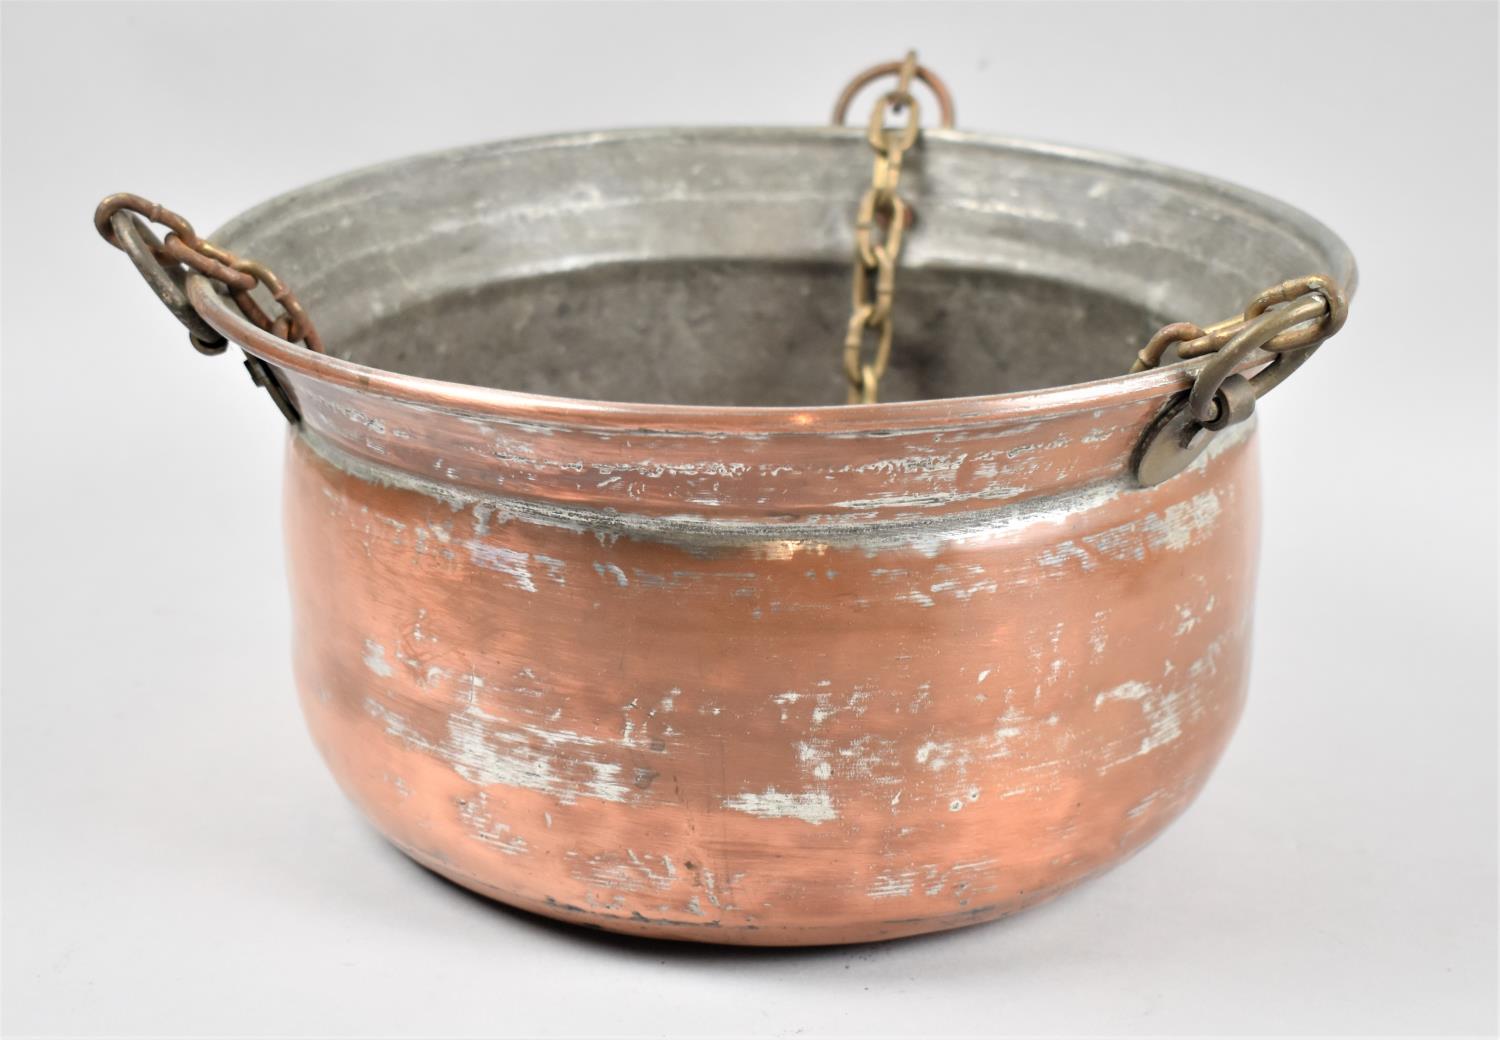 A Copper Hanging Planter with Chains, 25cm Diameter